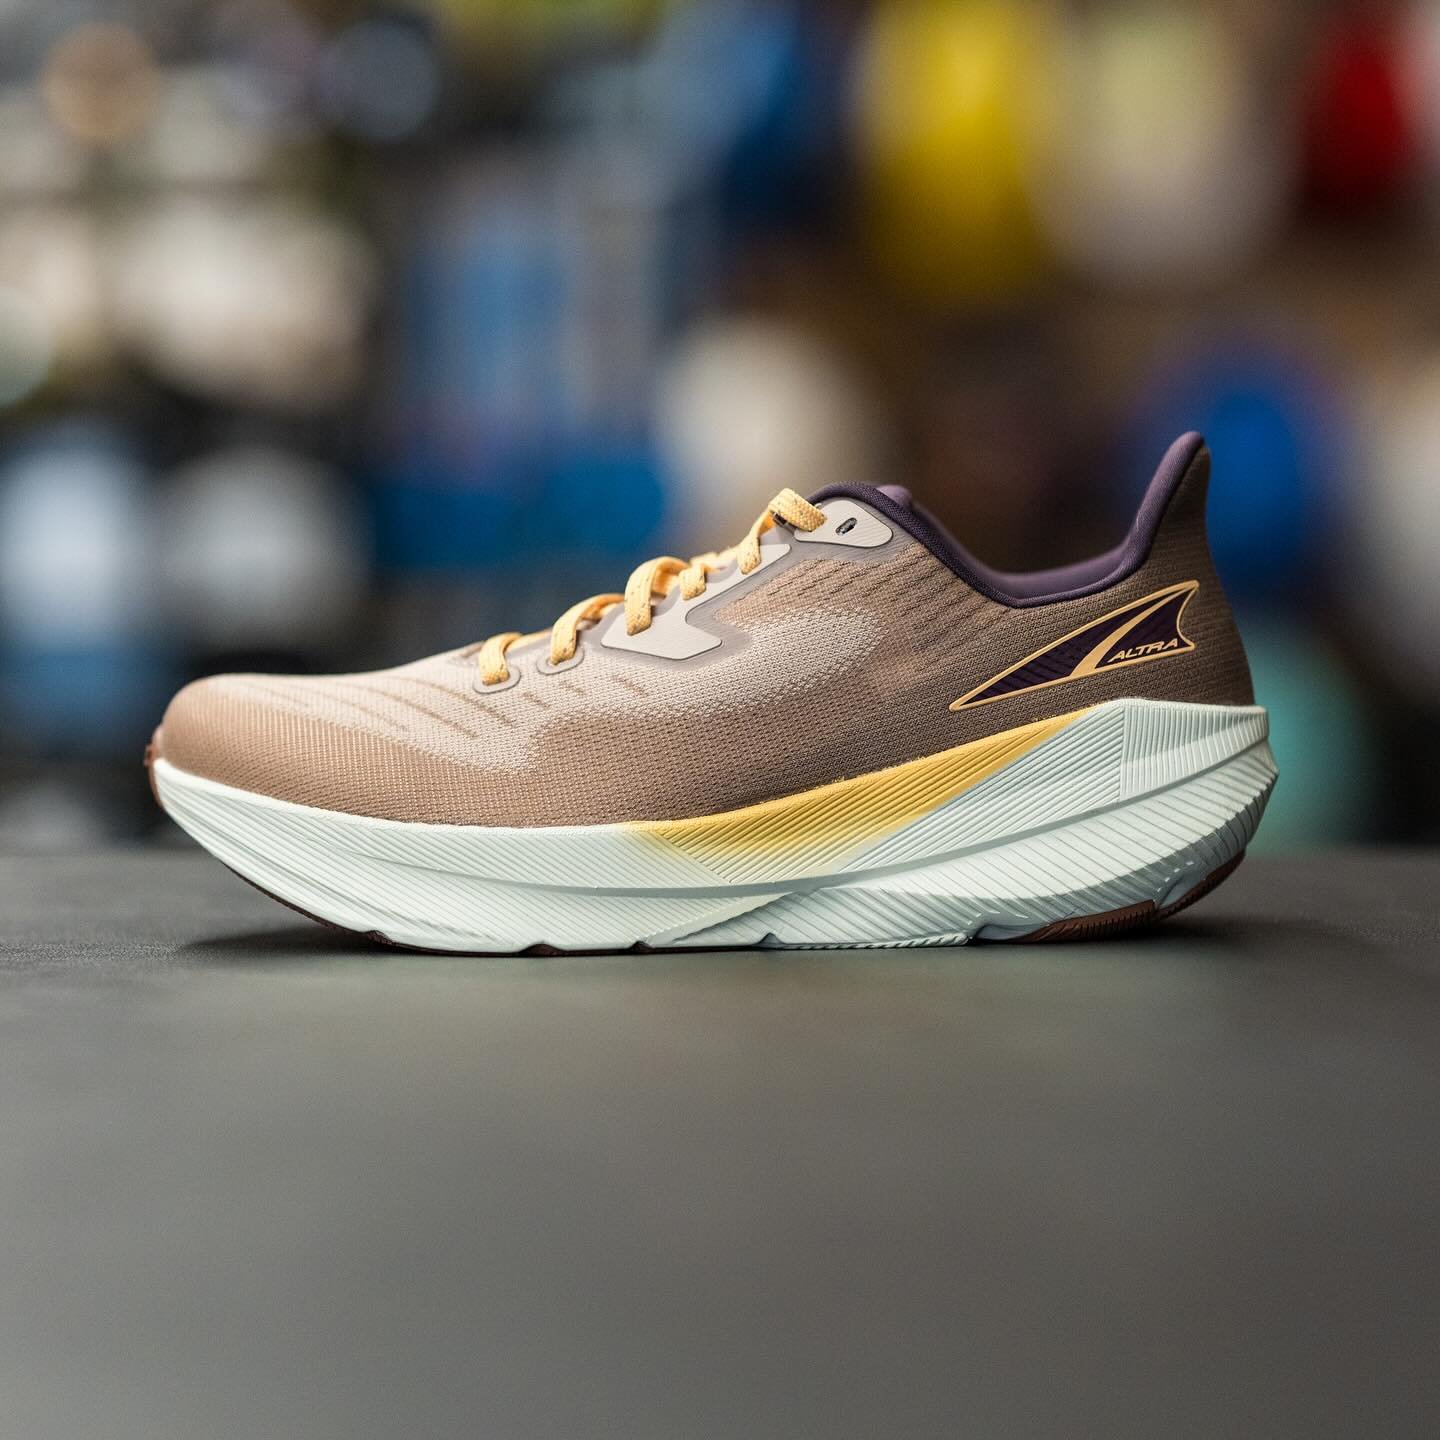 Looking for toe space but can&rsquo;t quite do zero drop? Altra has your solution whether you&rsquo;re looking for neutral, stability, or even a trail option! These new options from Altra have a 4mm heel to toe drop. 

Come try out either the Experie